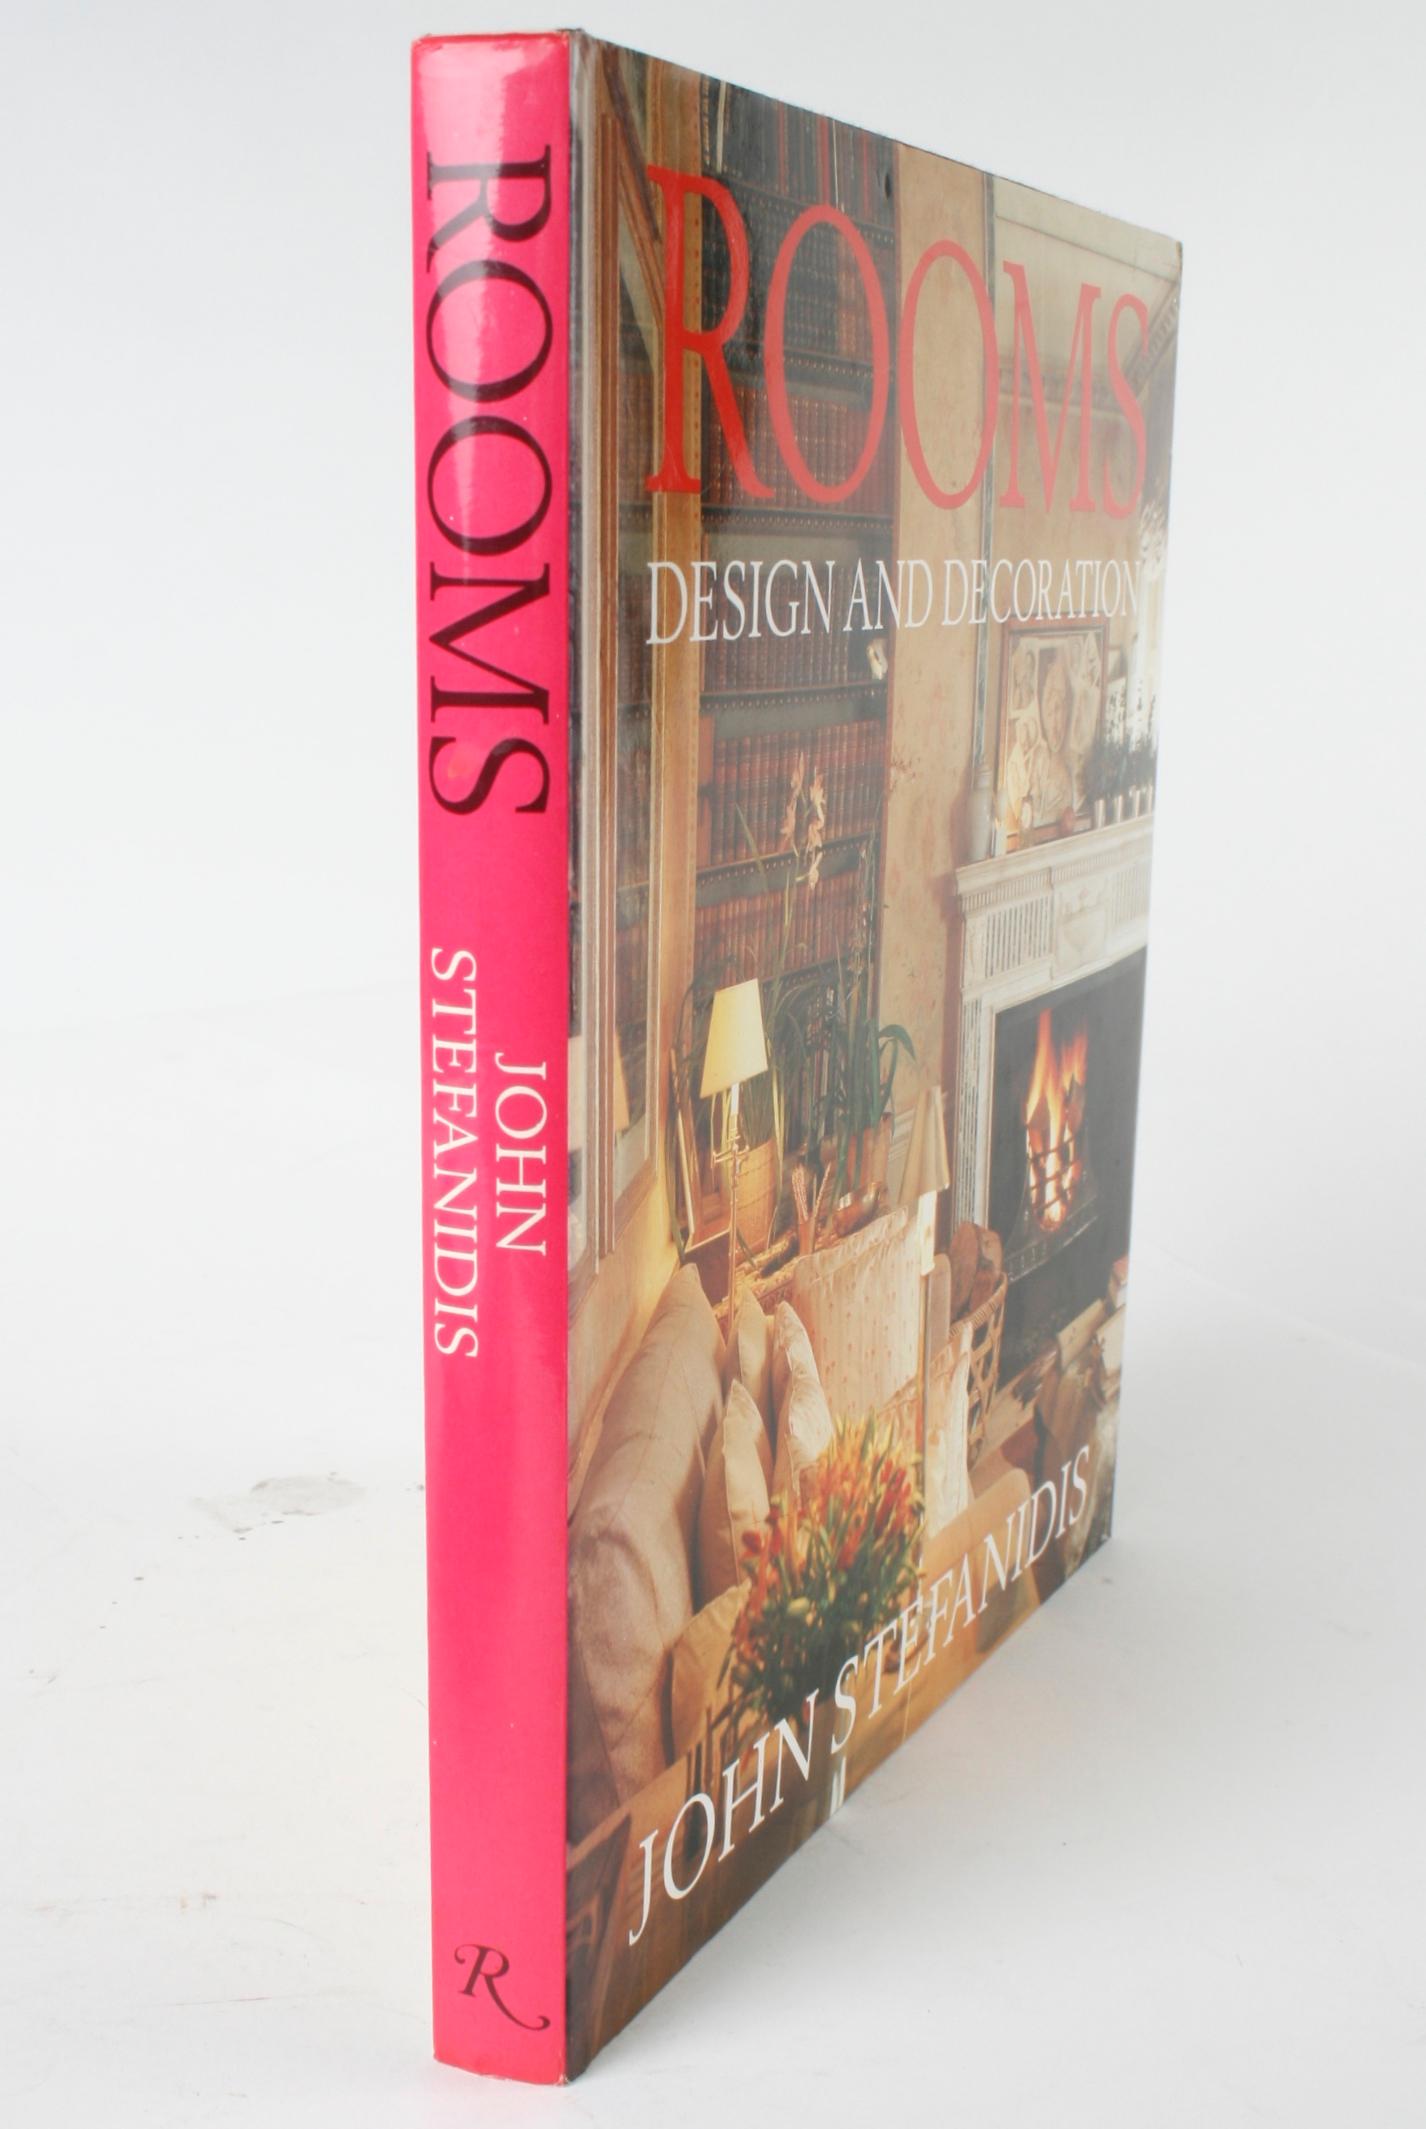 Rooms: Design and Decoration Signed First Edition by John Stefanidis 14